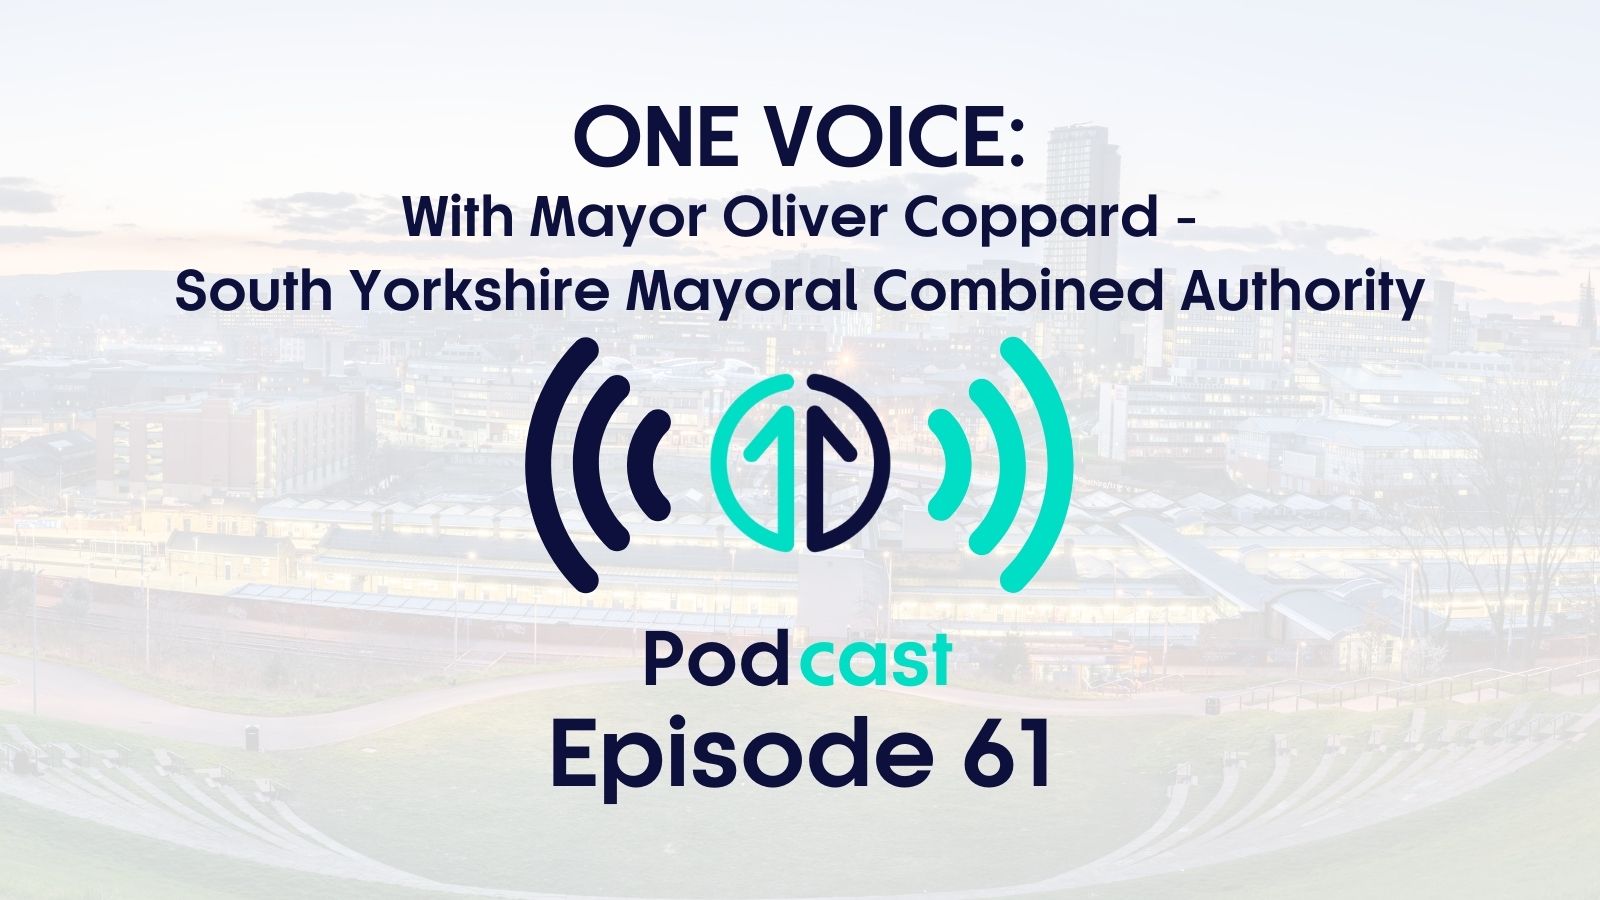 One Voice with Mayor Oliver Coppard, South Yorkshire Mayoral Combined Authority | Episode 61